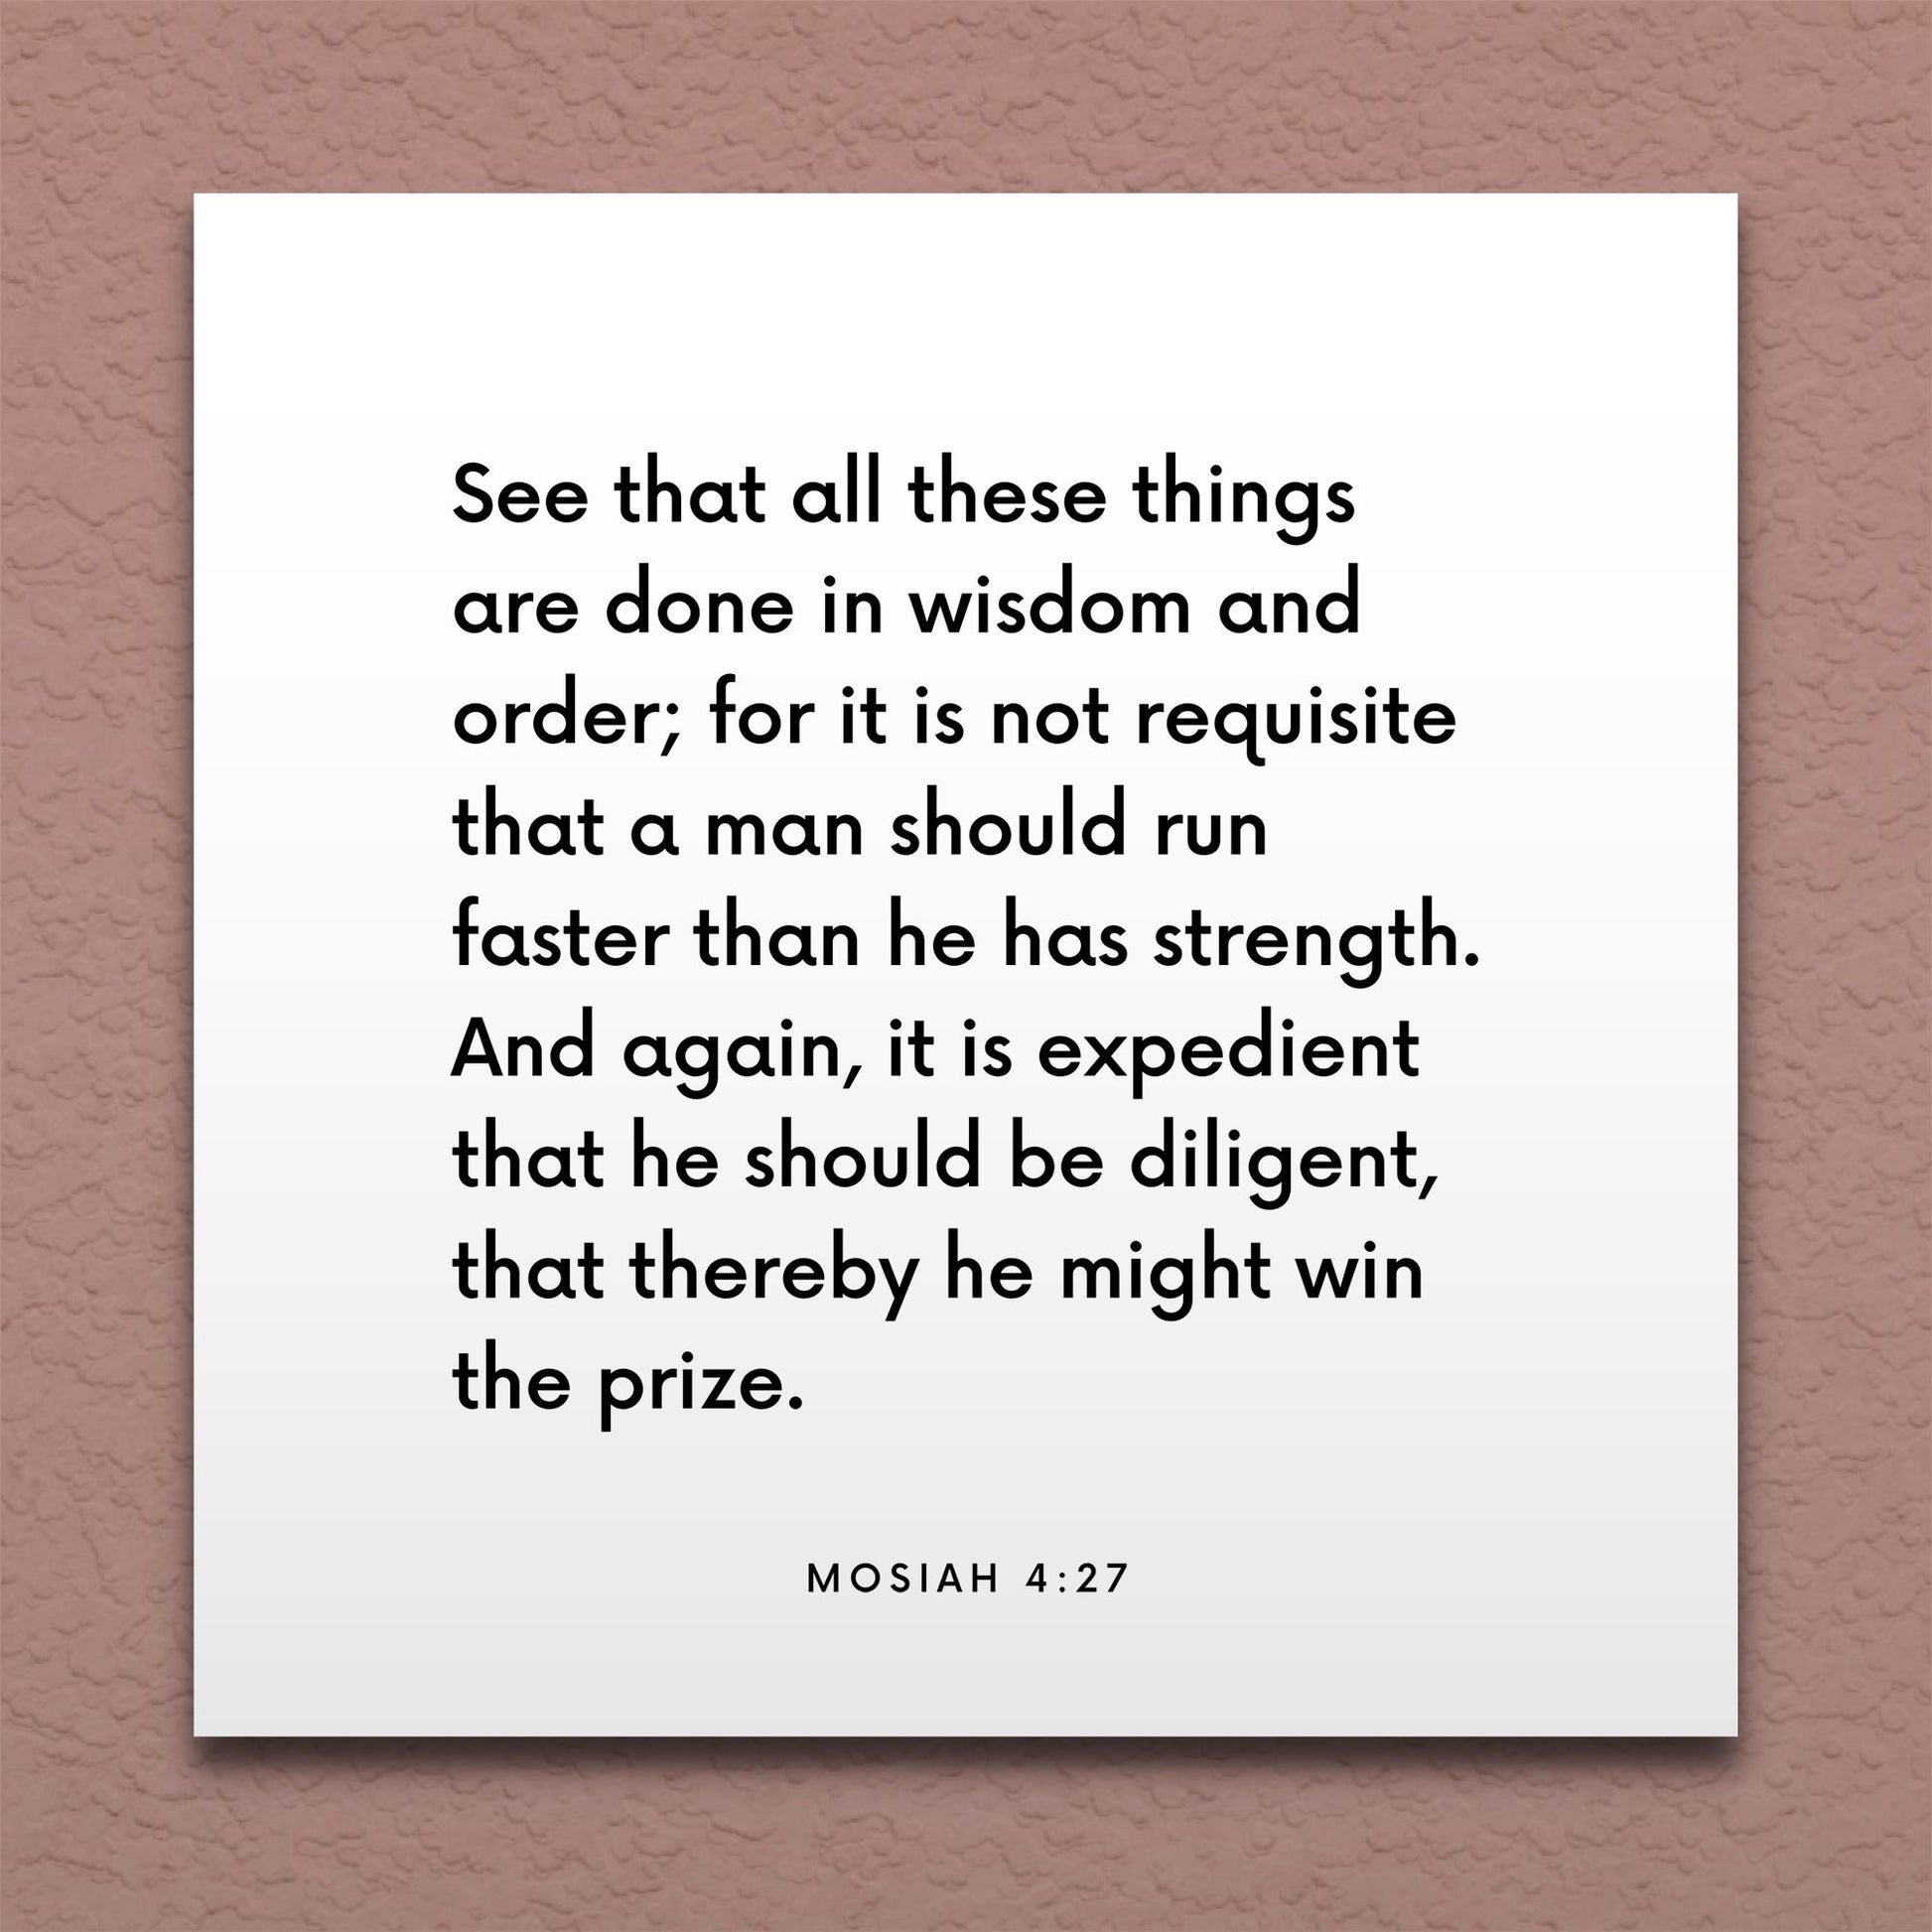 Wall-mounted scripture tile for Mosiah 4:27 - "See that all these things are done in wisdom and order"